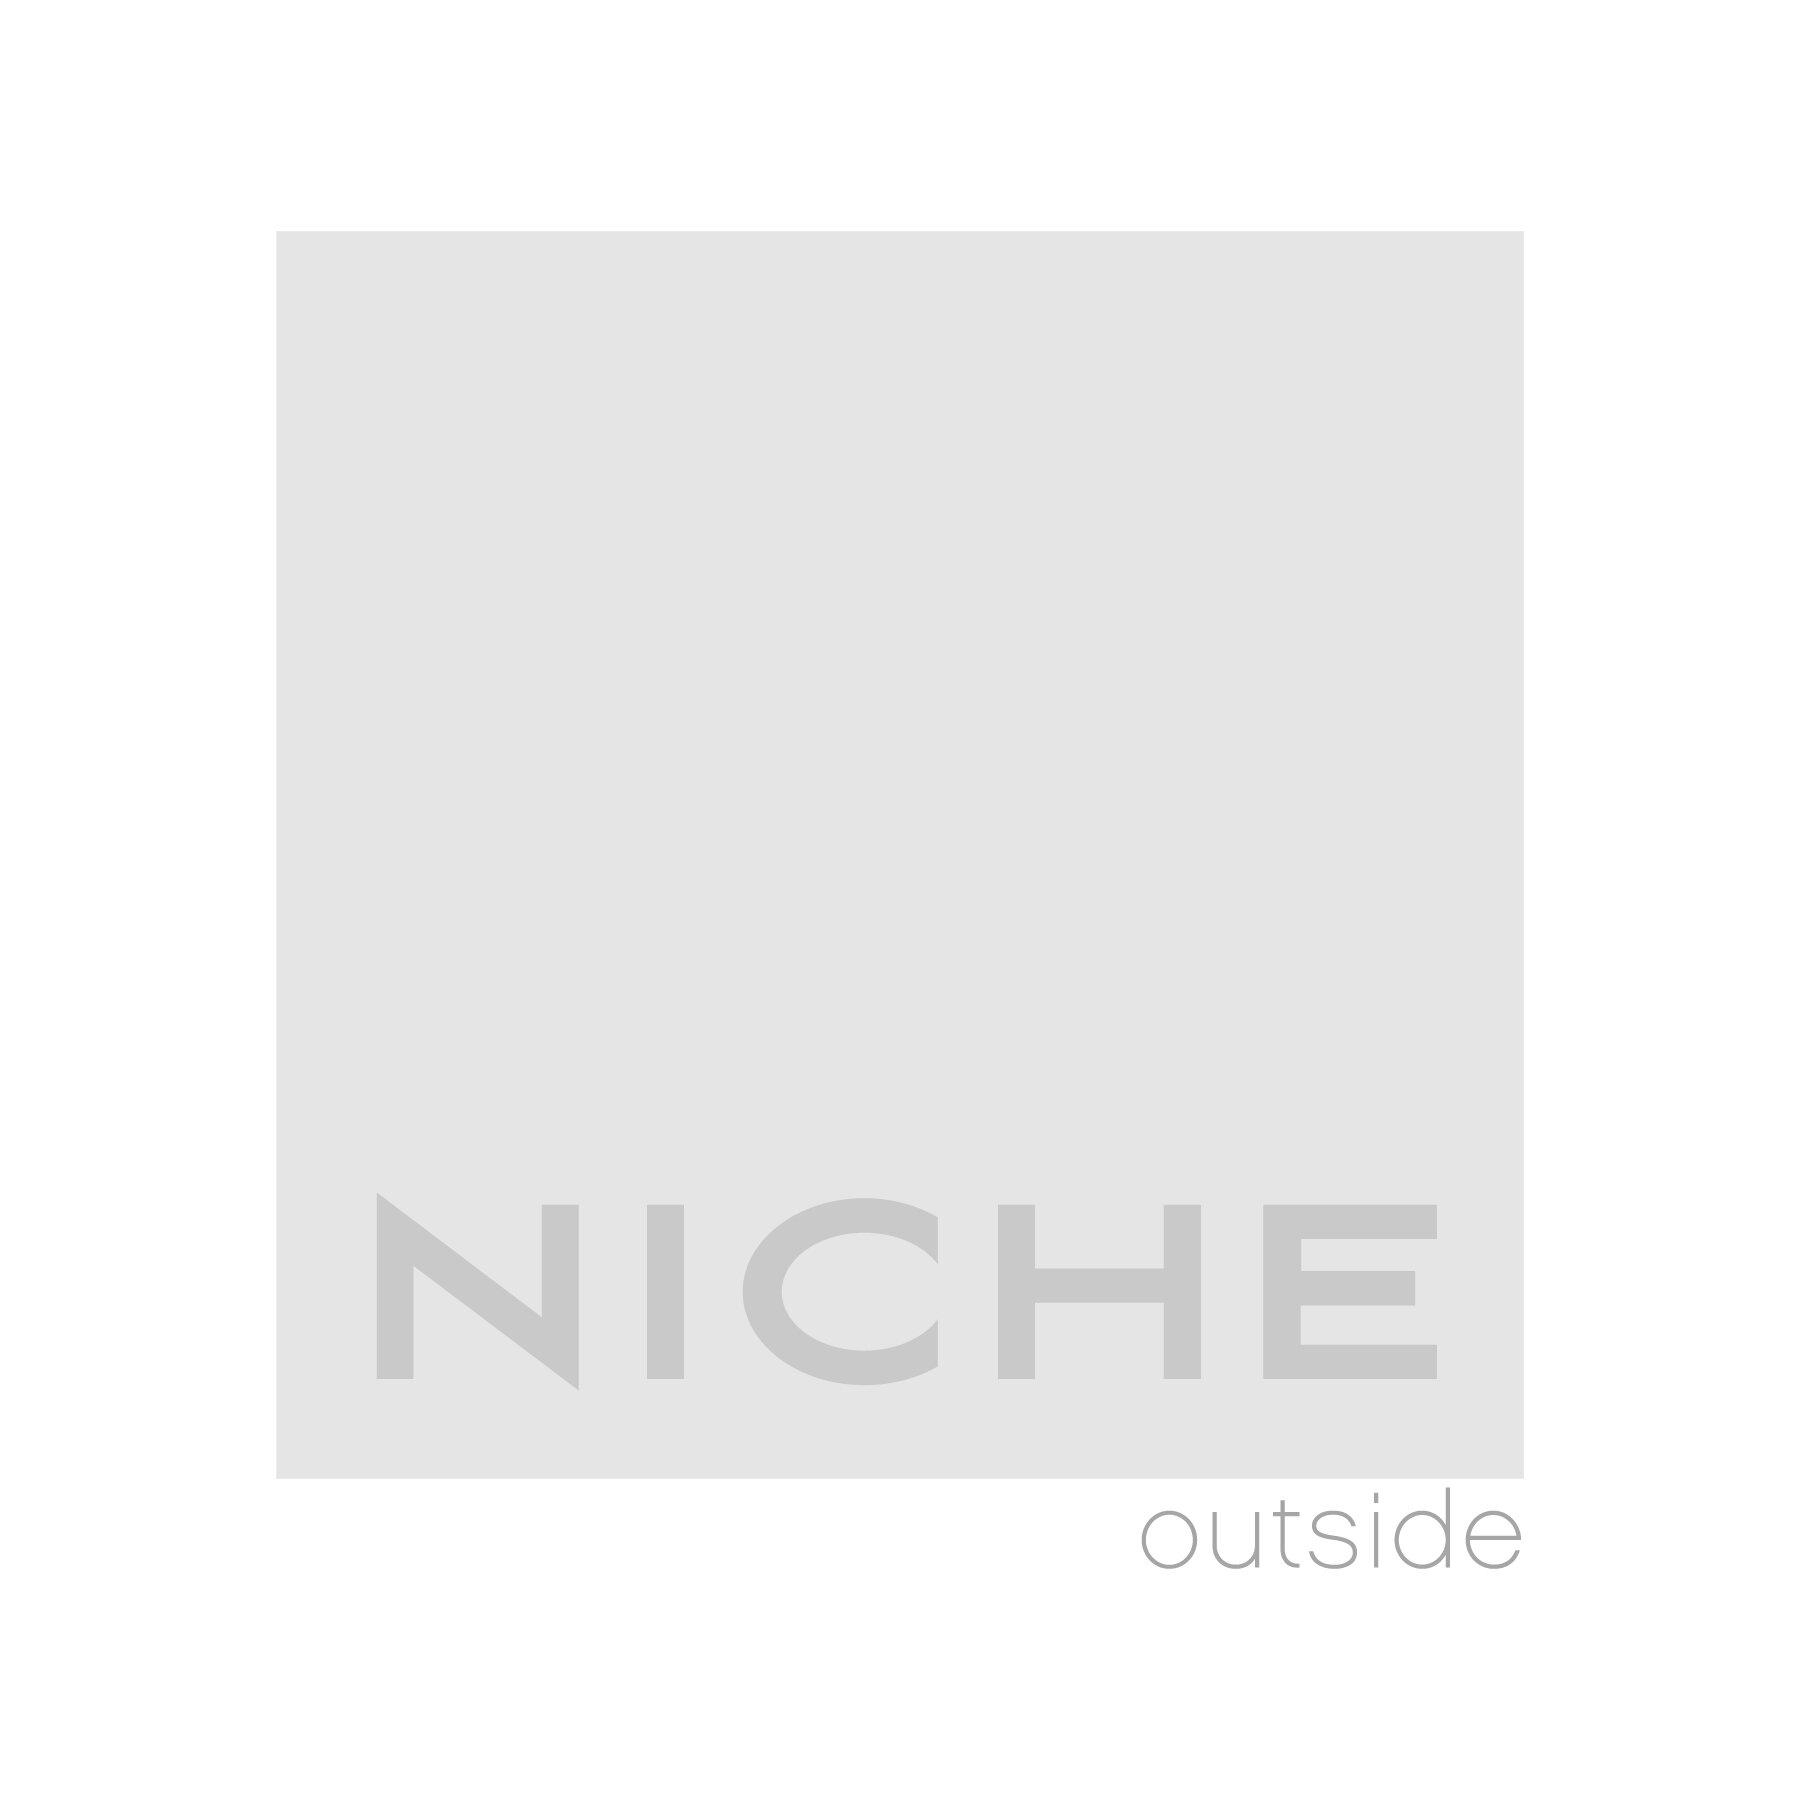 NICHE outside | a TINY Seattle garden-focused boutique on Capitol Hill http://t.co/4OEuGv8UtW